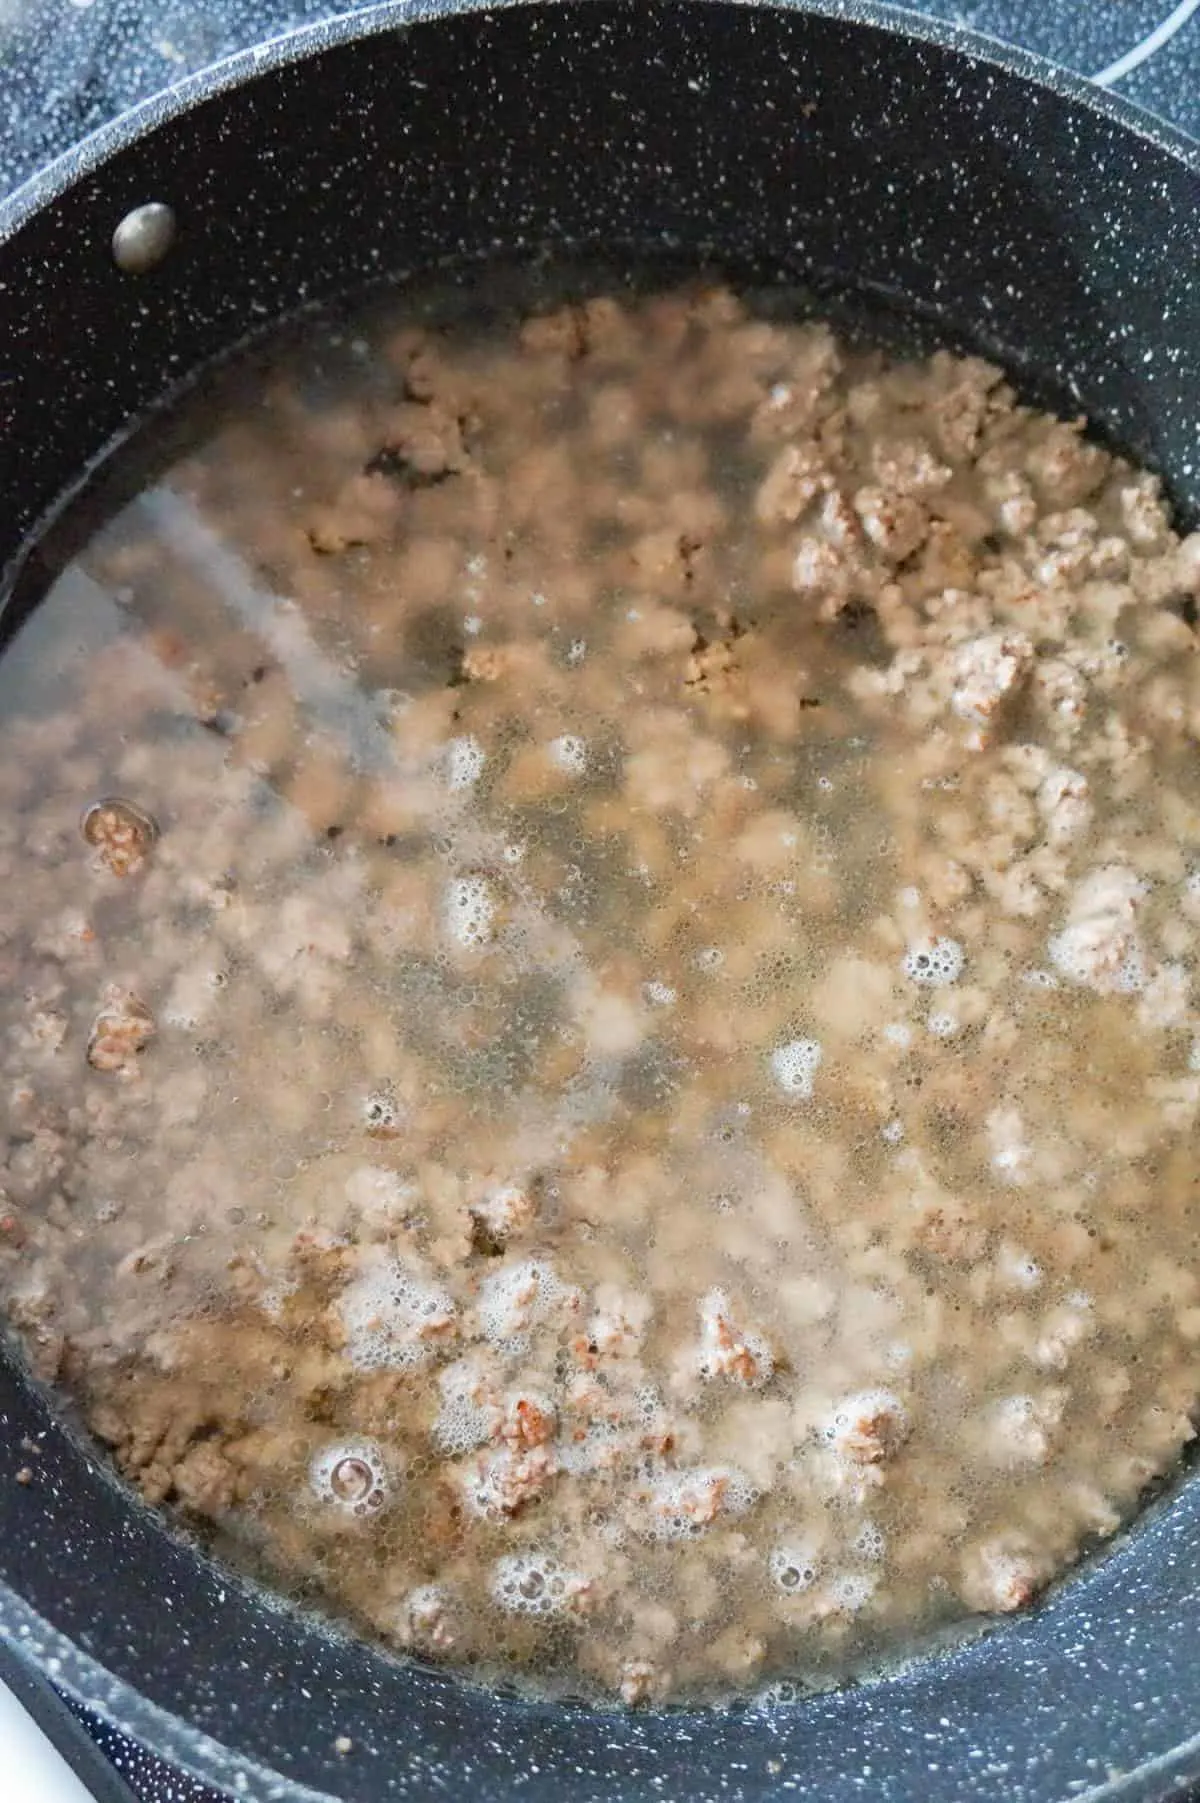 water and cooked ground beef in a pan